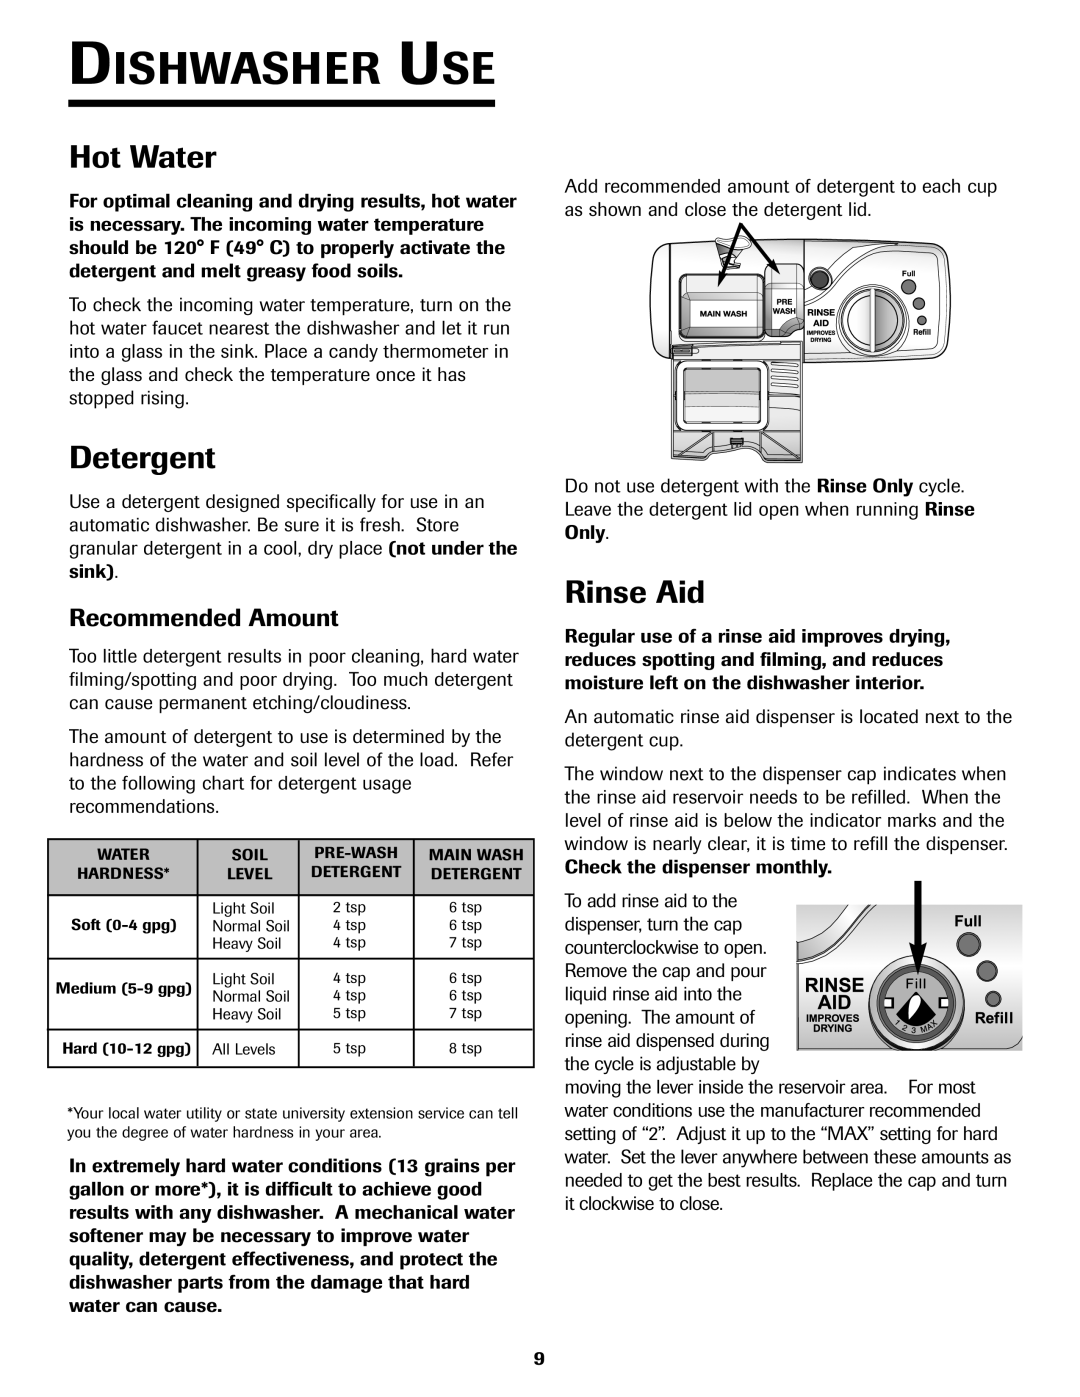 Jenn-Air JDB-5 warranty Dishwasher Use, Hot Water, Detergent, Rinse Aid, Recommended Amount 